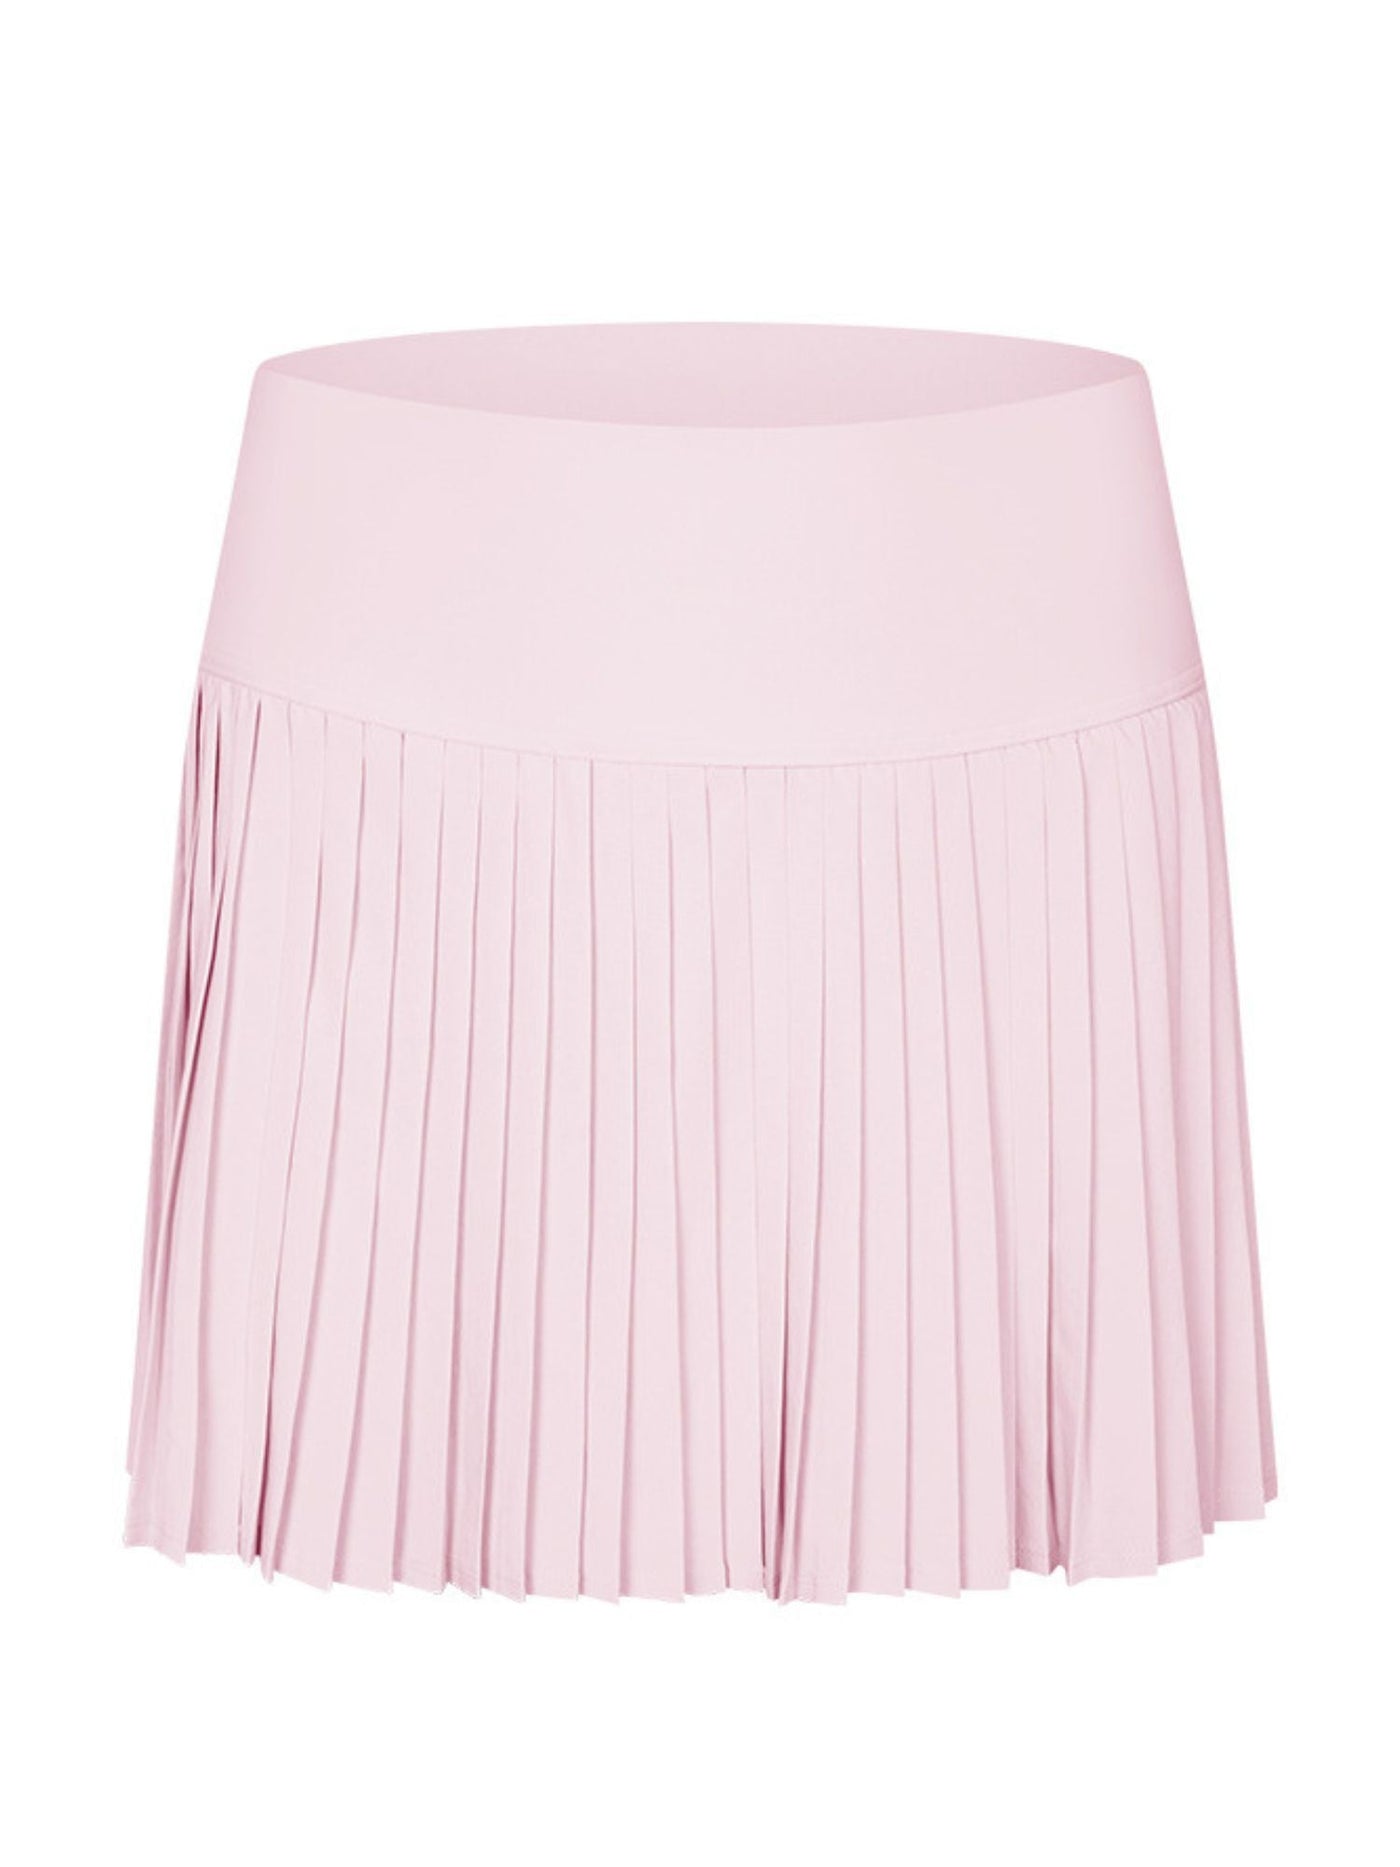 Ballet Pink Navalora Fit Active Skirt with Shorts liner